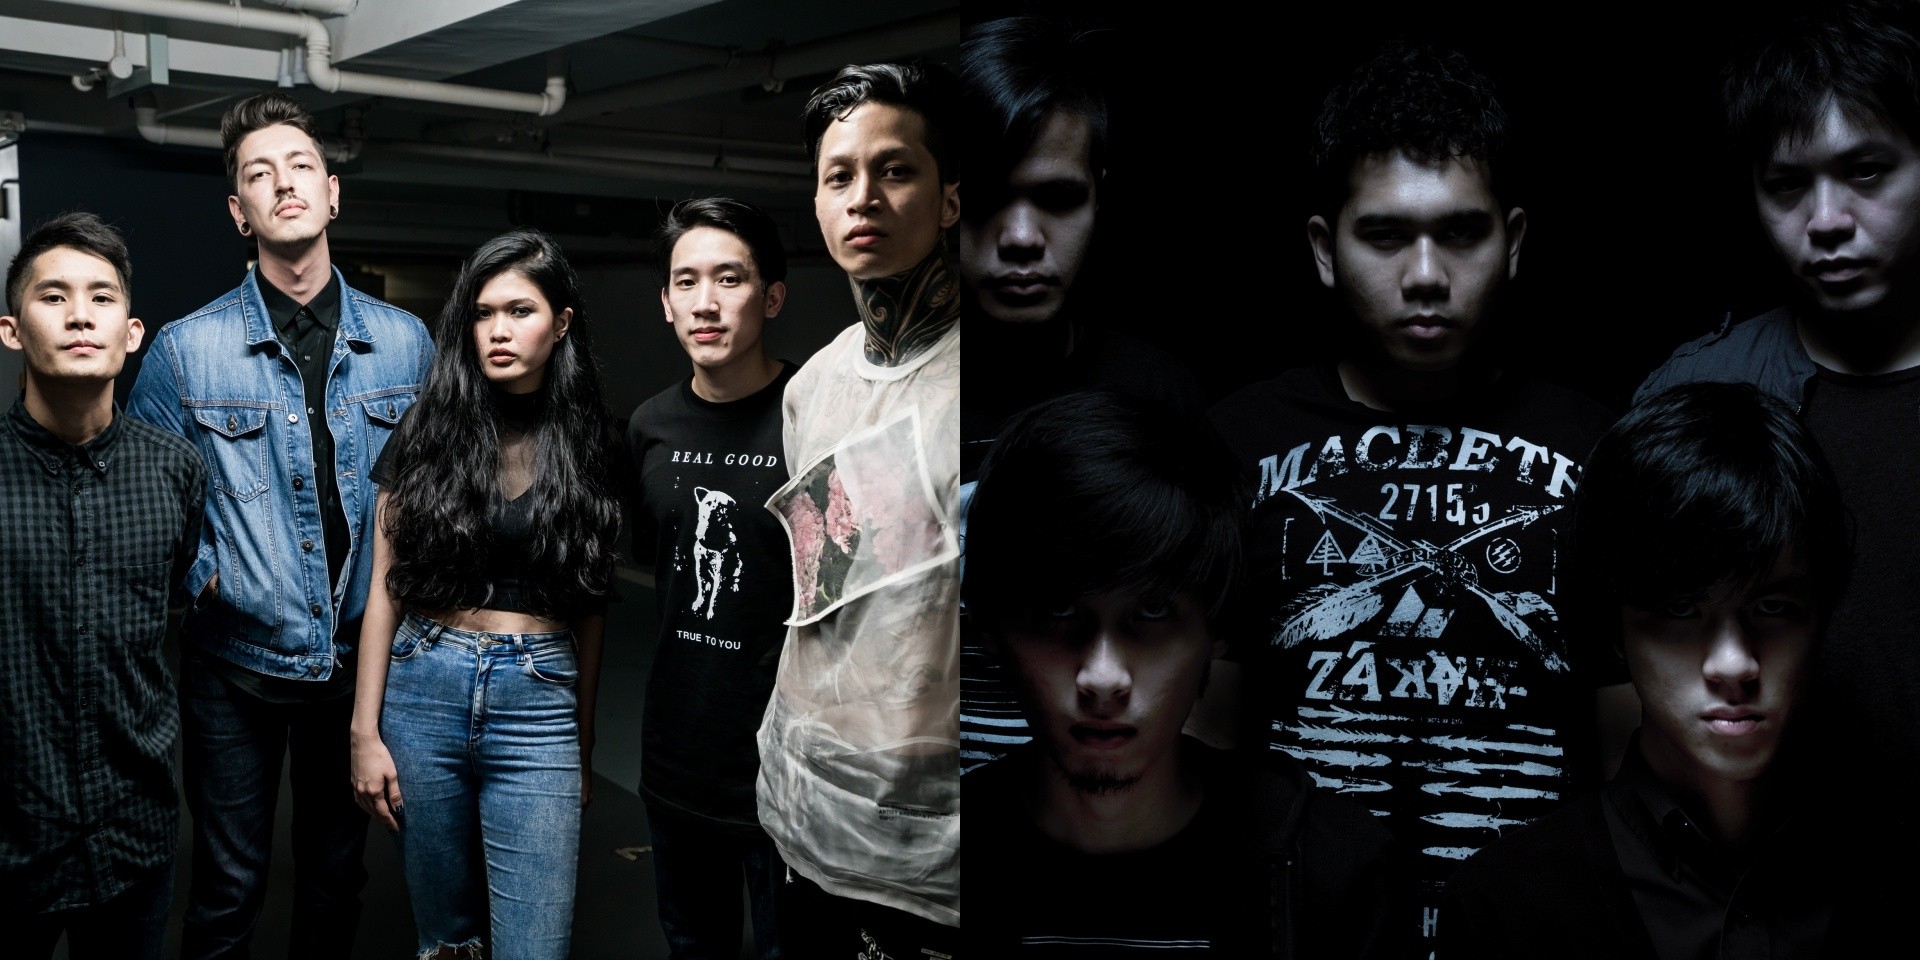 Caracal, A Vacant Affair and more to perform at SGMUSO fundraiser festival, The Outer Limits